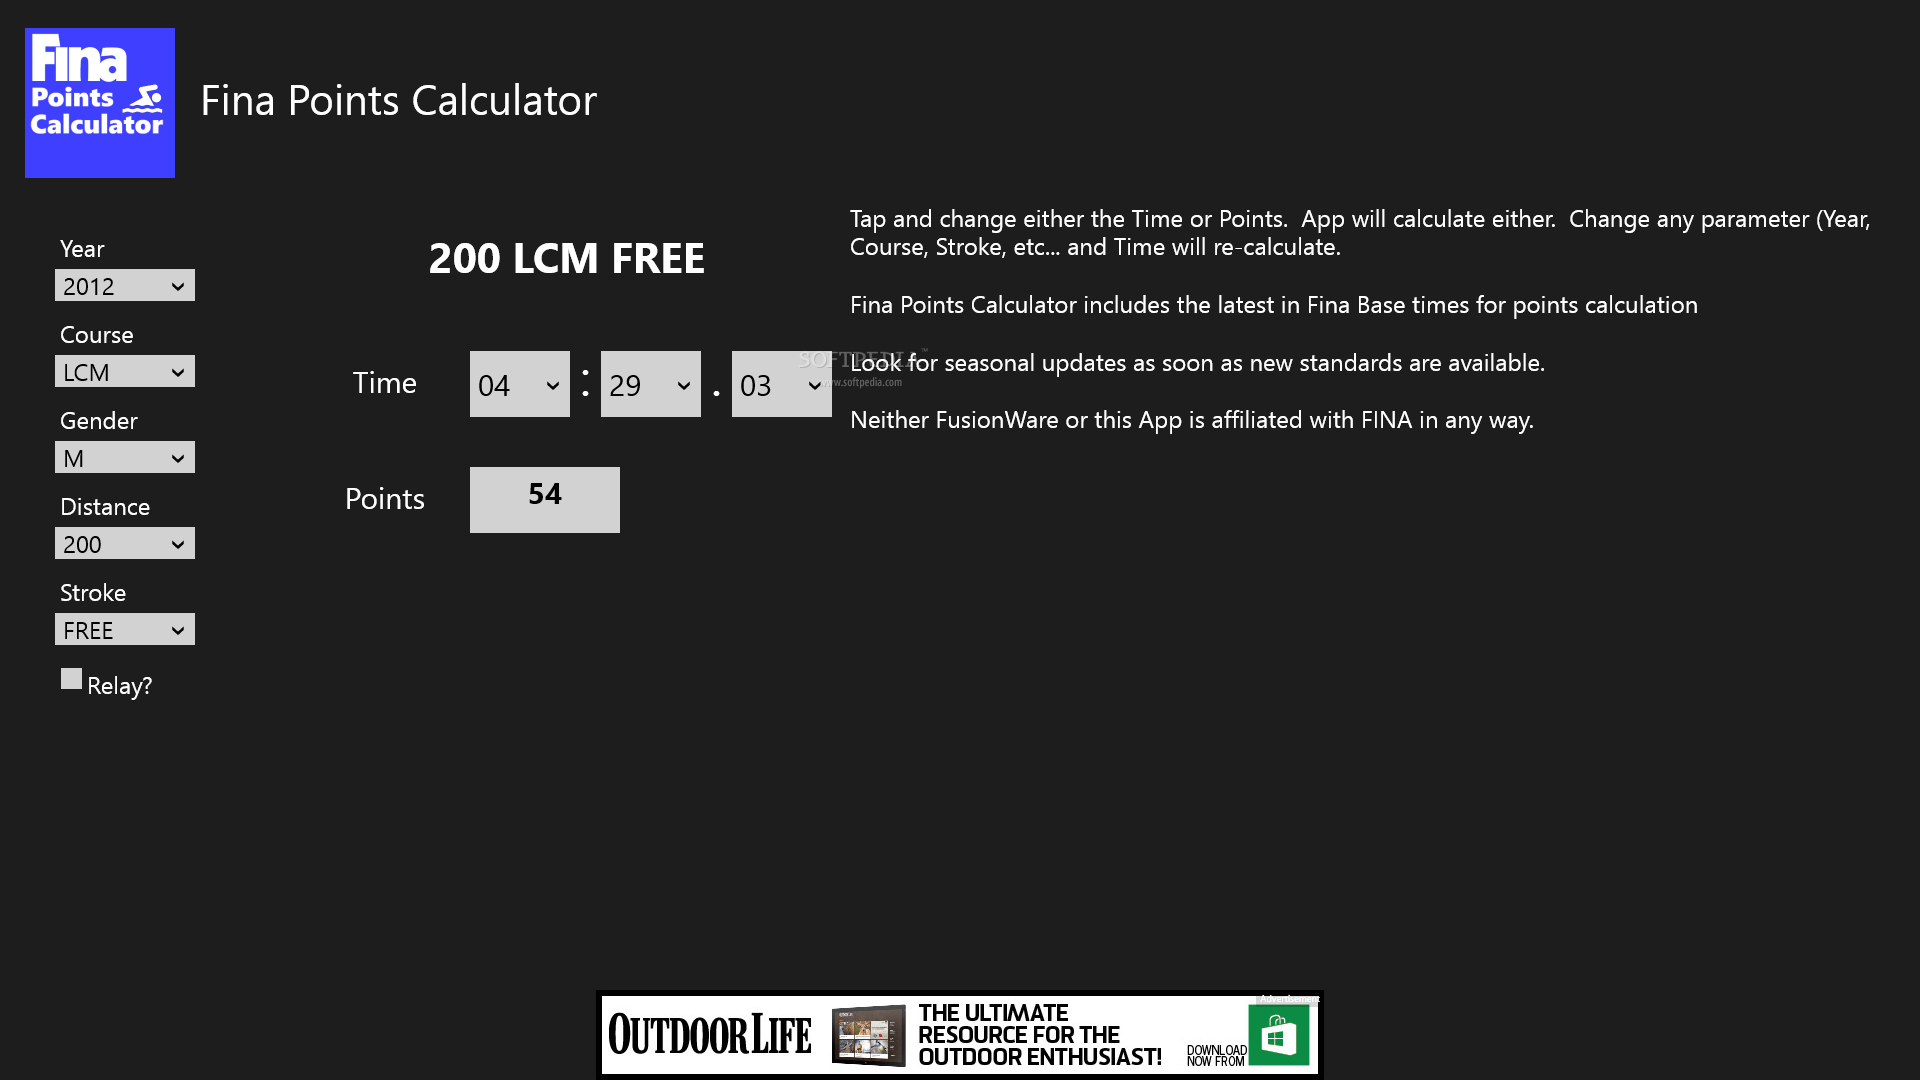 Fina Points Calc for Windows 8